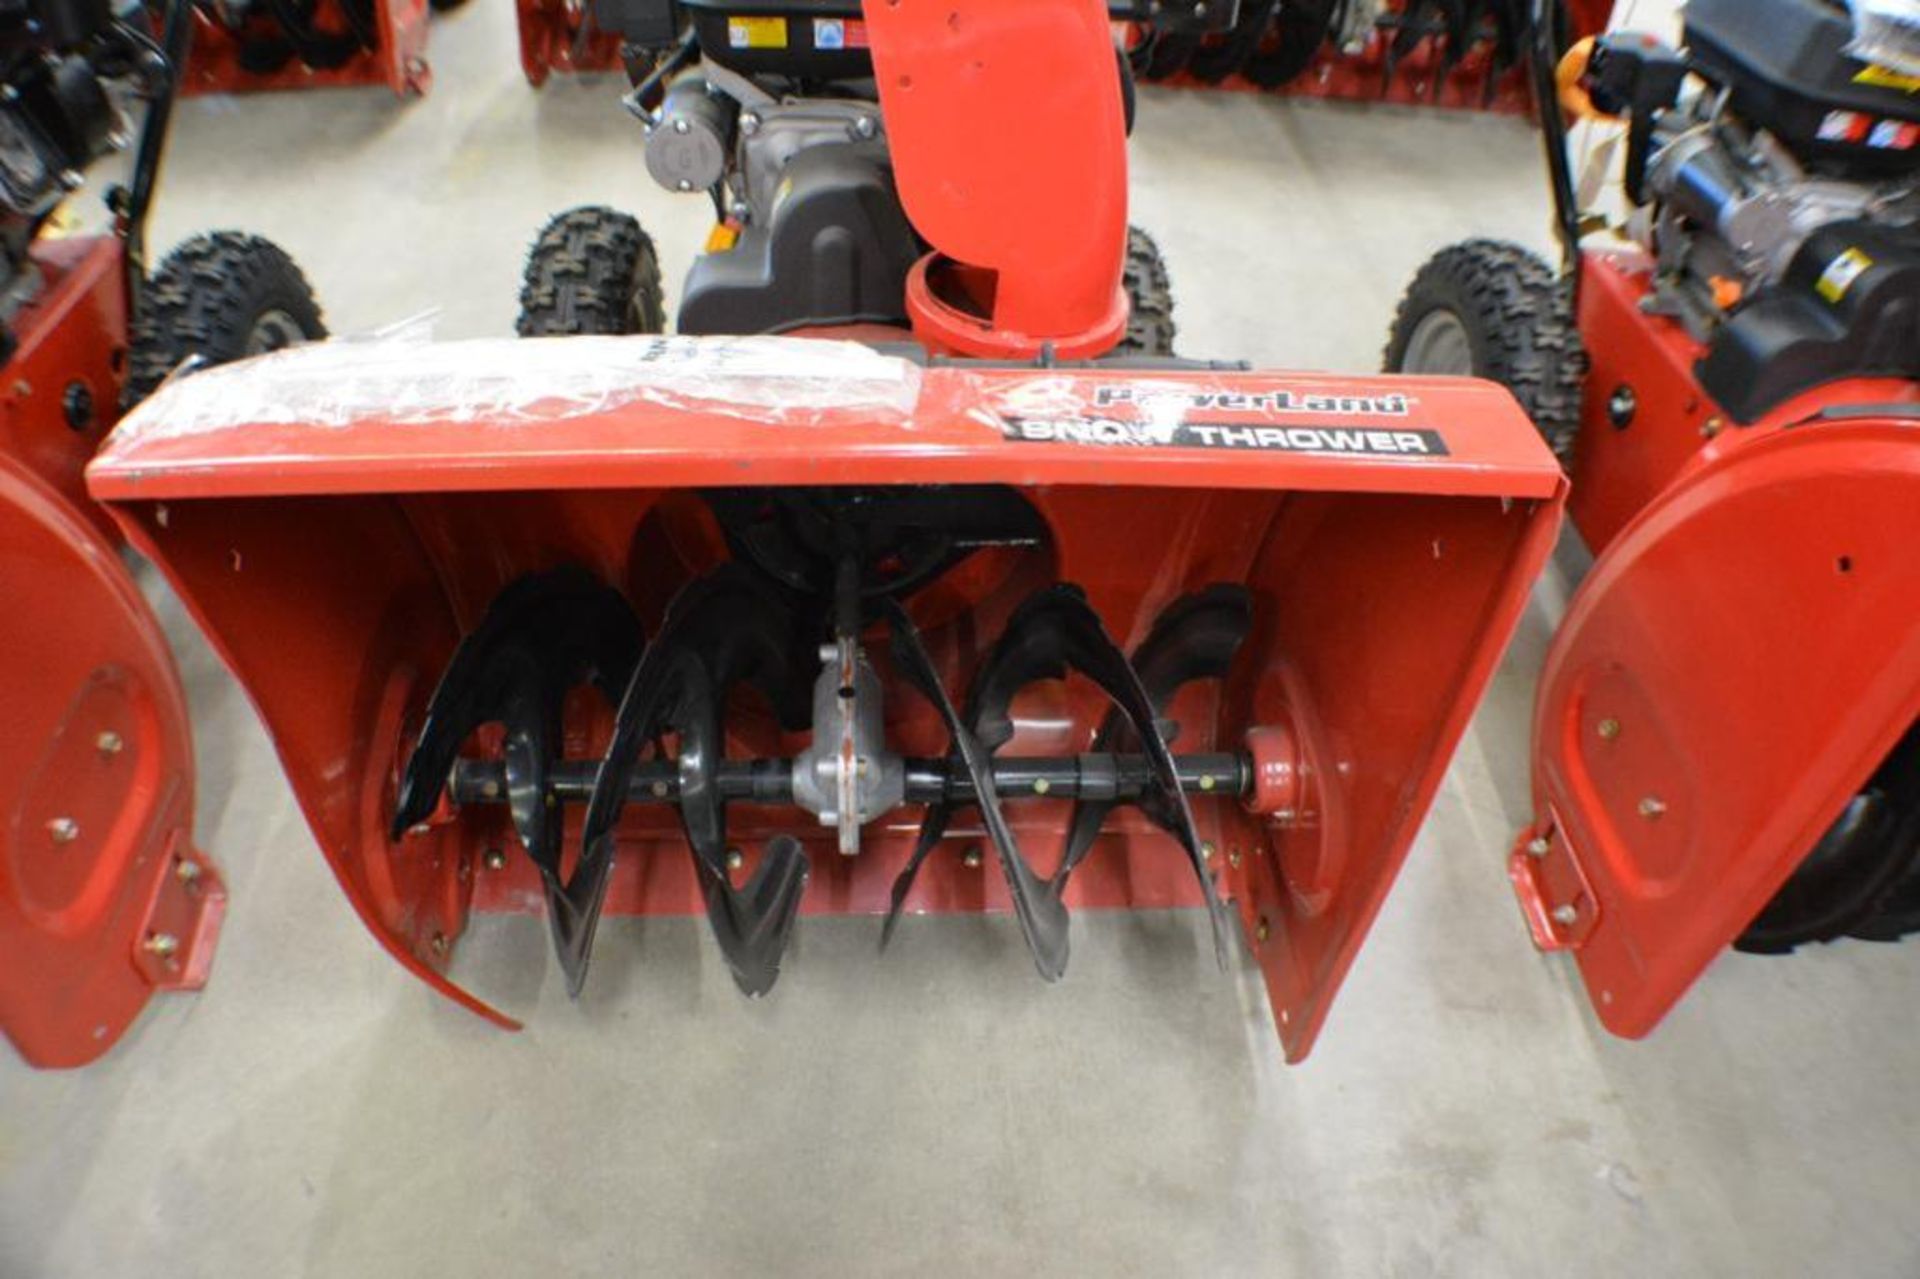 Snow Thrower 24in. 6.5HP with electric Start Engine 4 Stroke by Powerland - Image 3 of 6